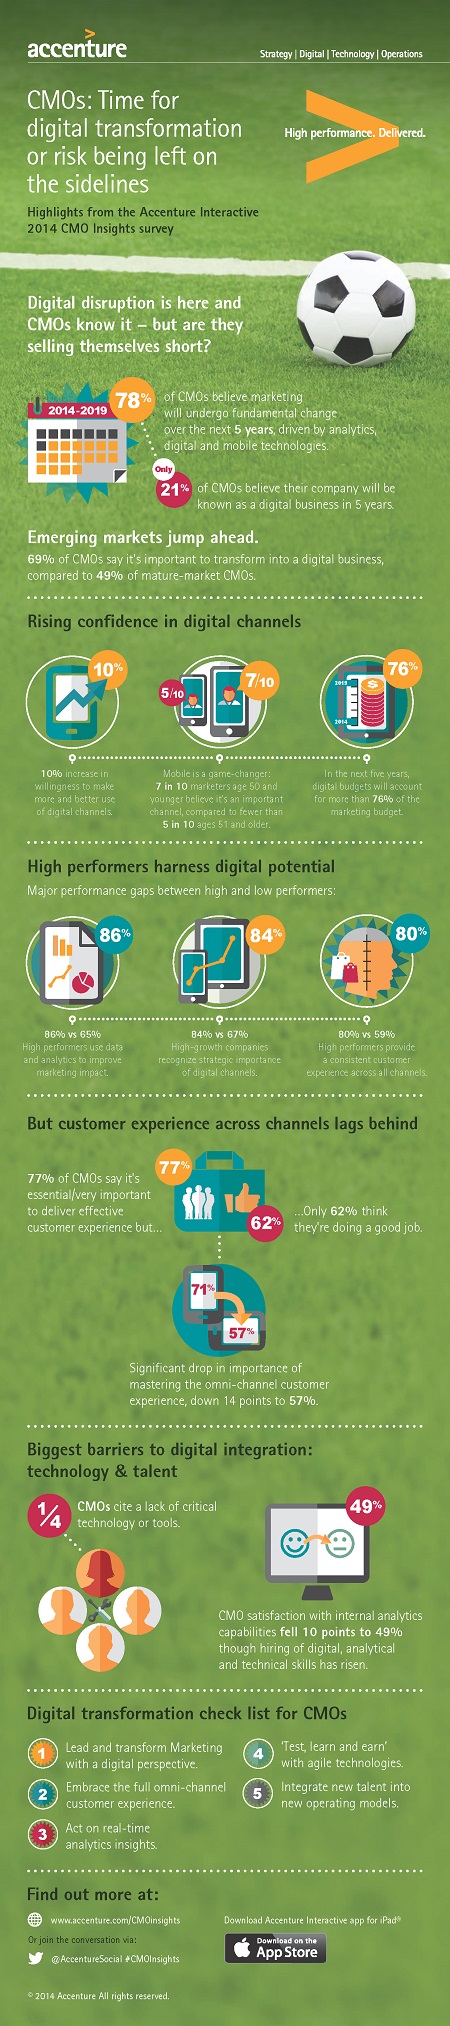 Accenture-CMO-Insights-2014-Infographic